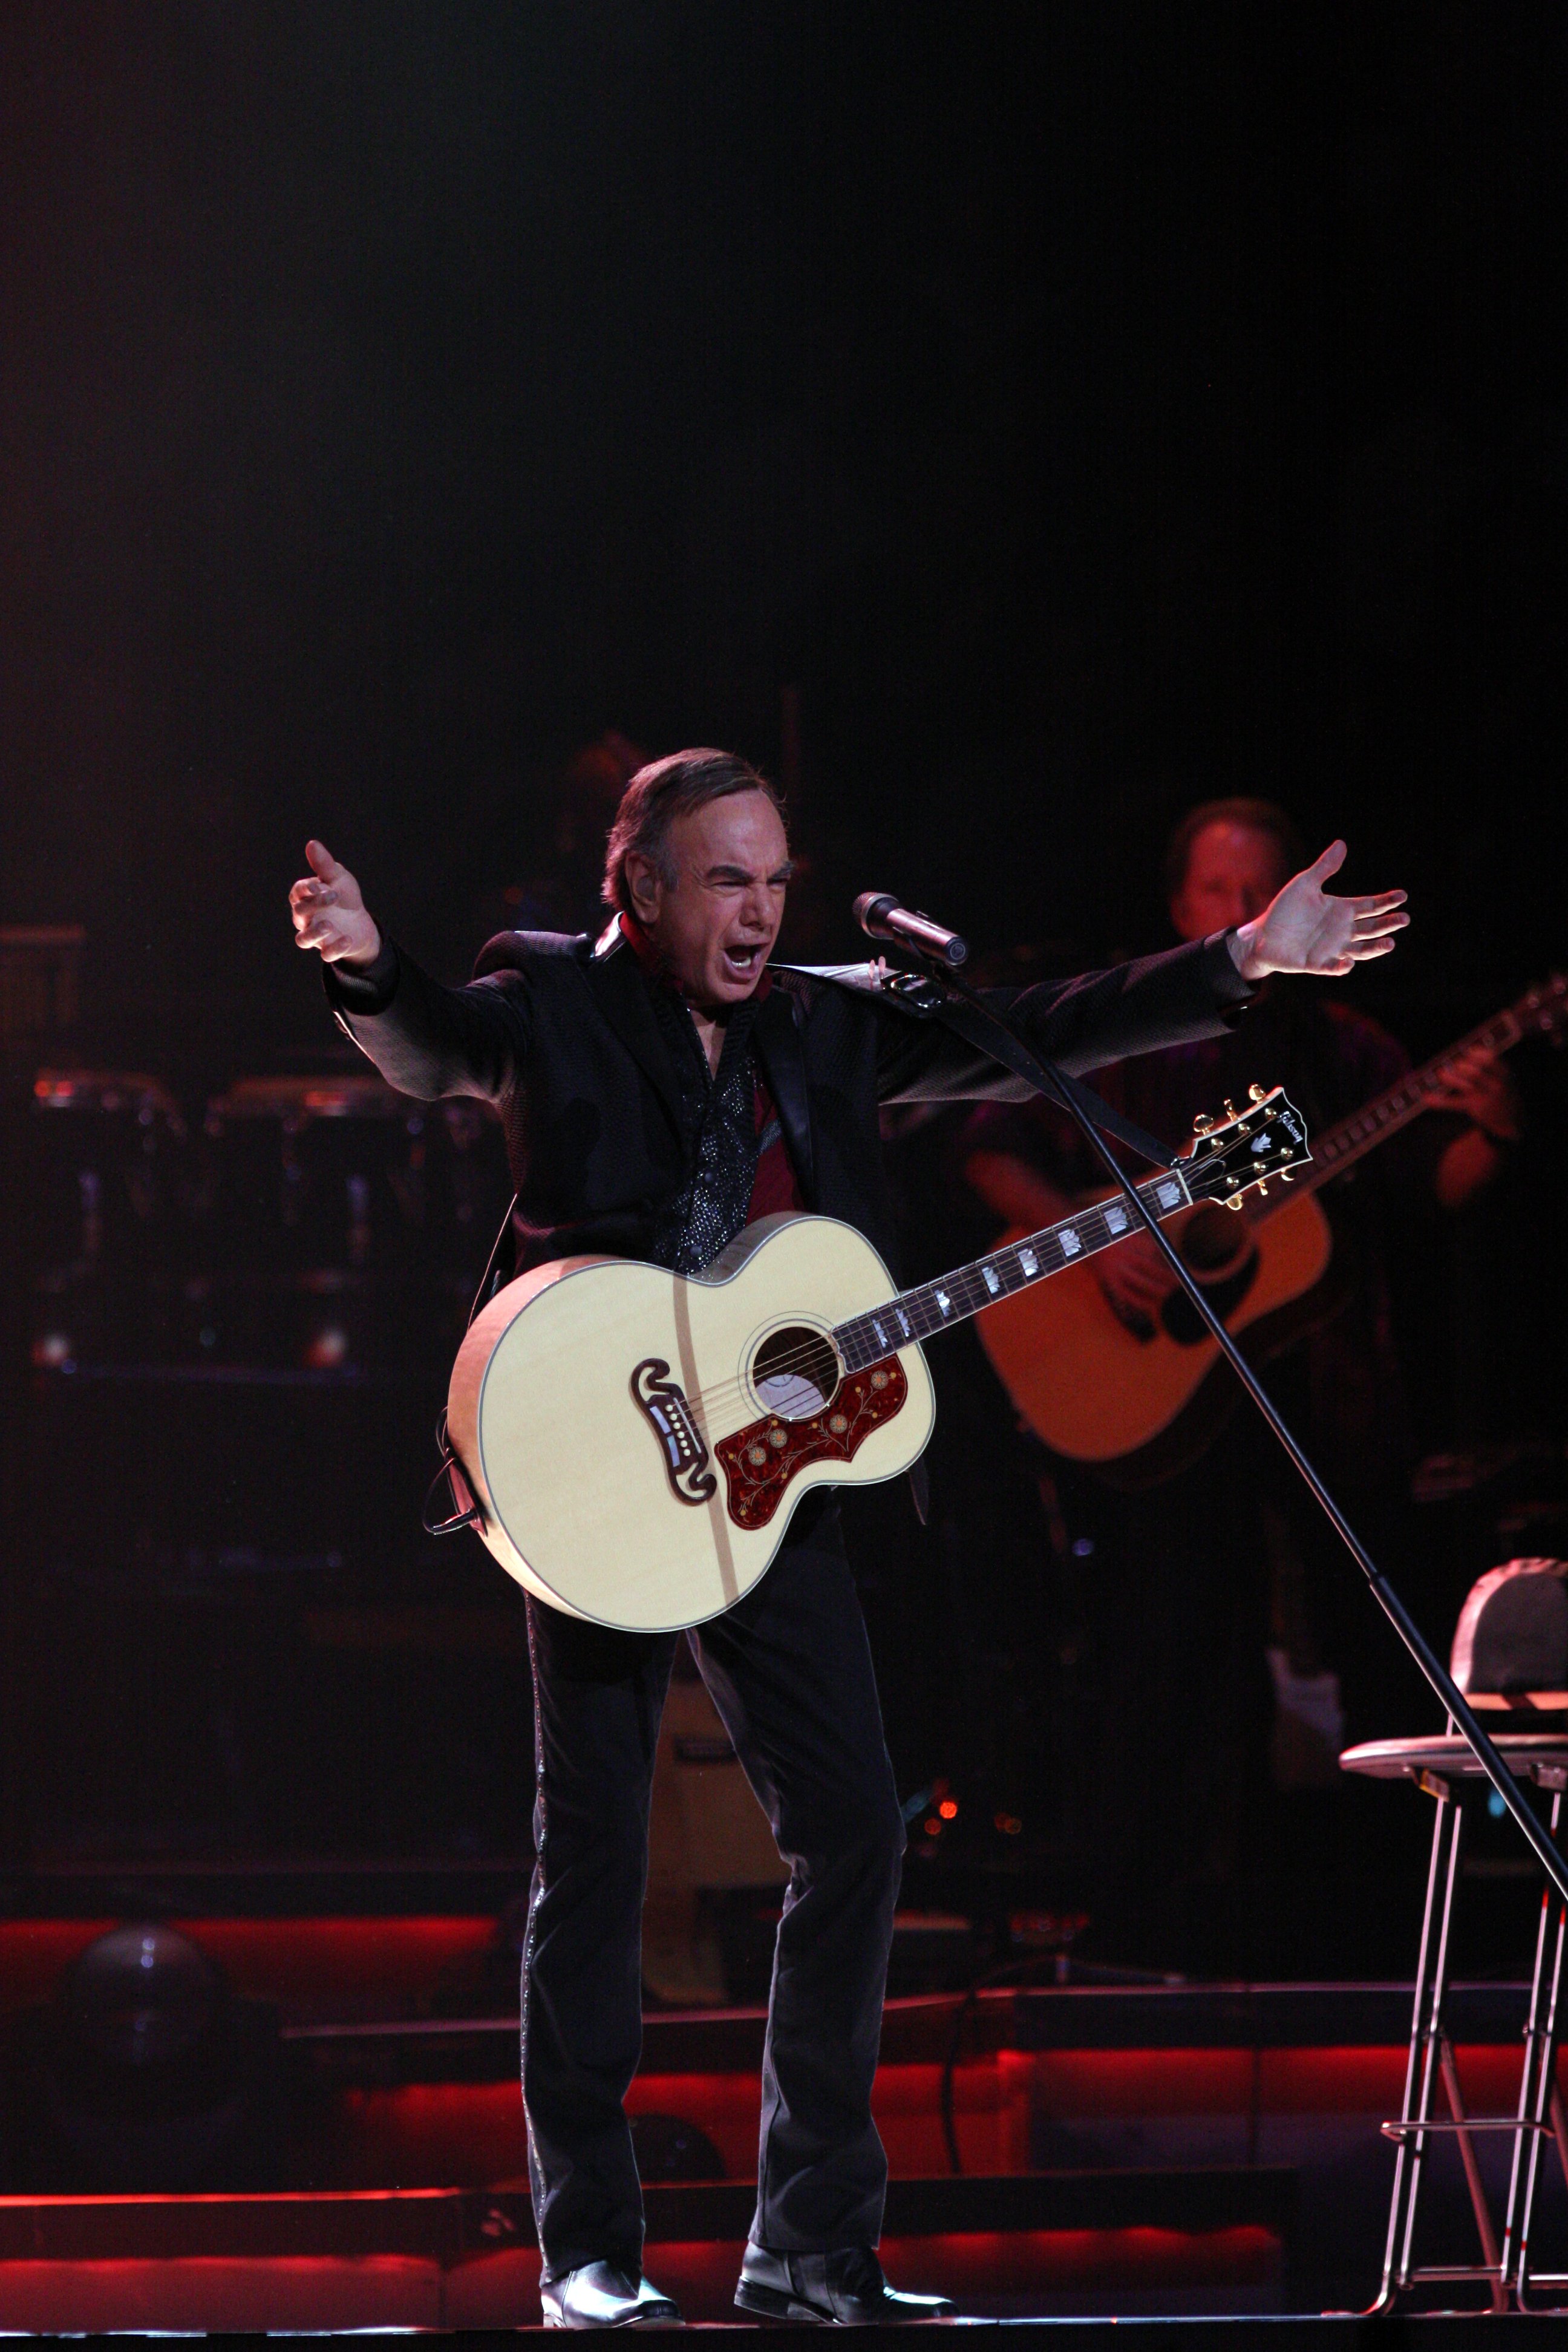 Neil Diamond performs at the Acer Arena on 26 March 2011. | Source: Wikimedia Commons.